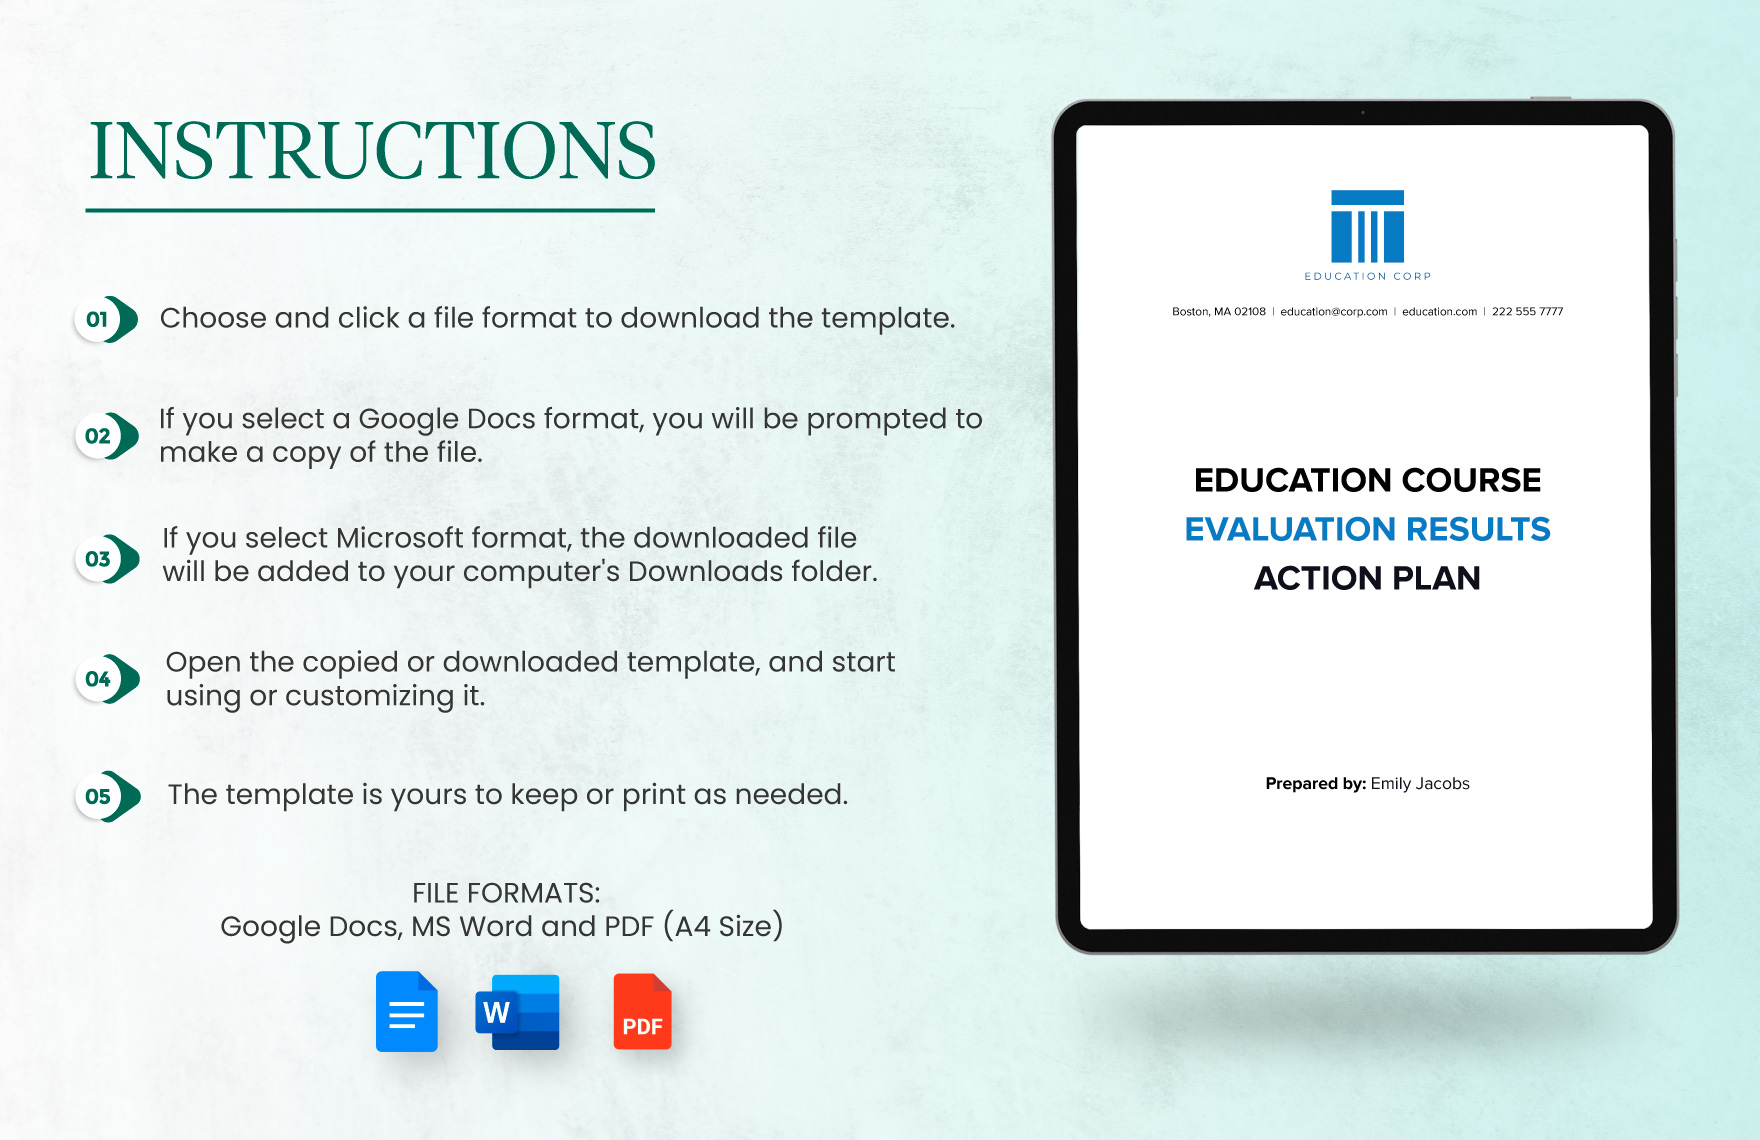 Education Course Evaluation Results Action Plan Template